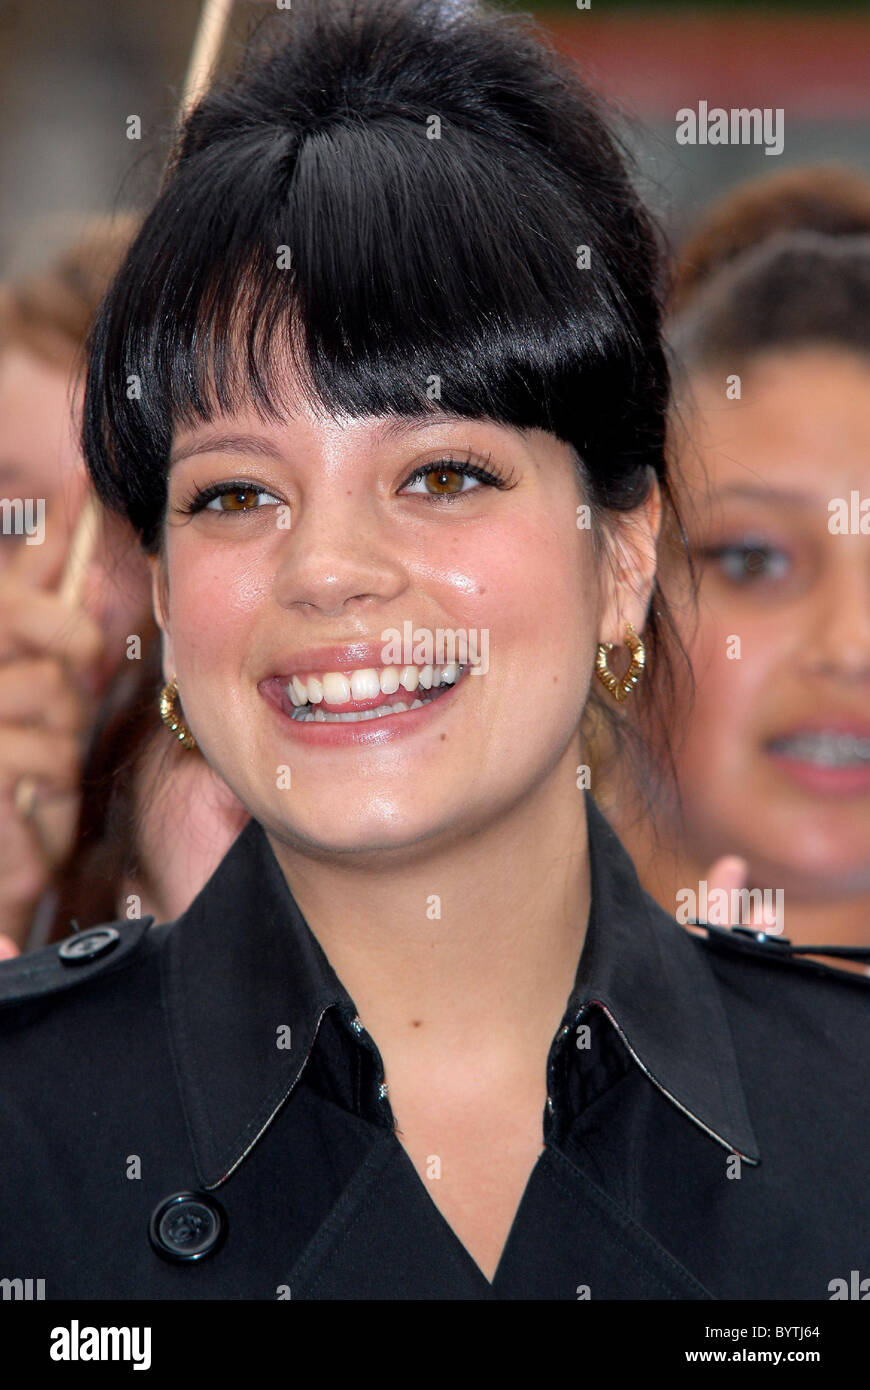 Lily Allen 'Make Space Youth Review' photocall at Parliament Square. Lily Allen joins former MP Oona King to launch review Stock Photo